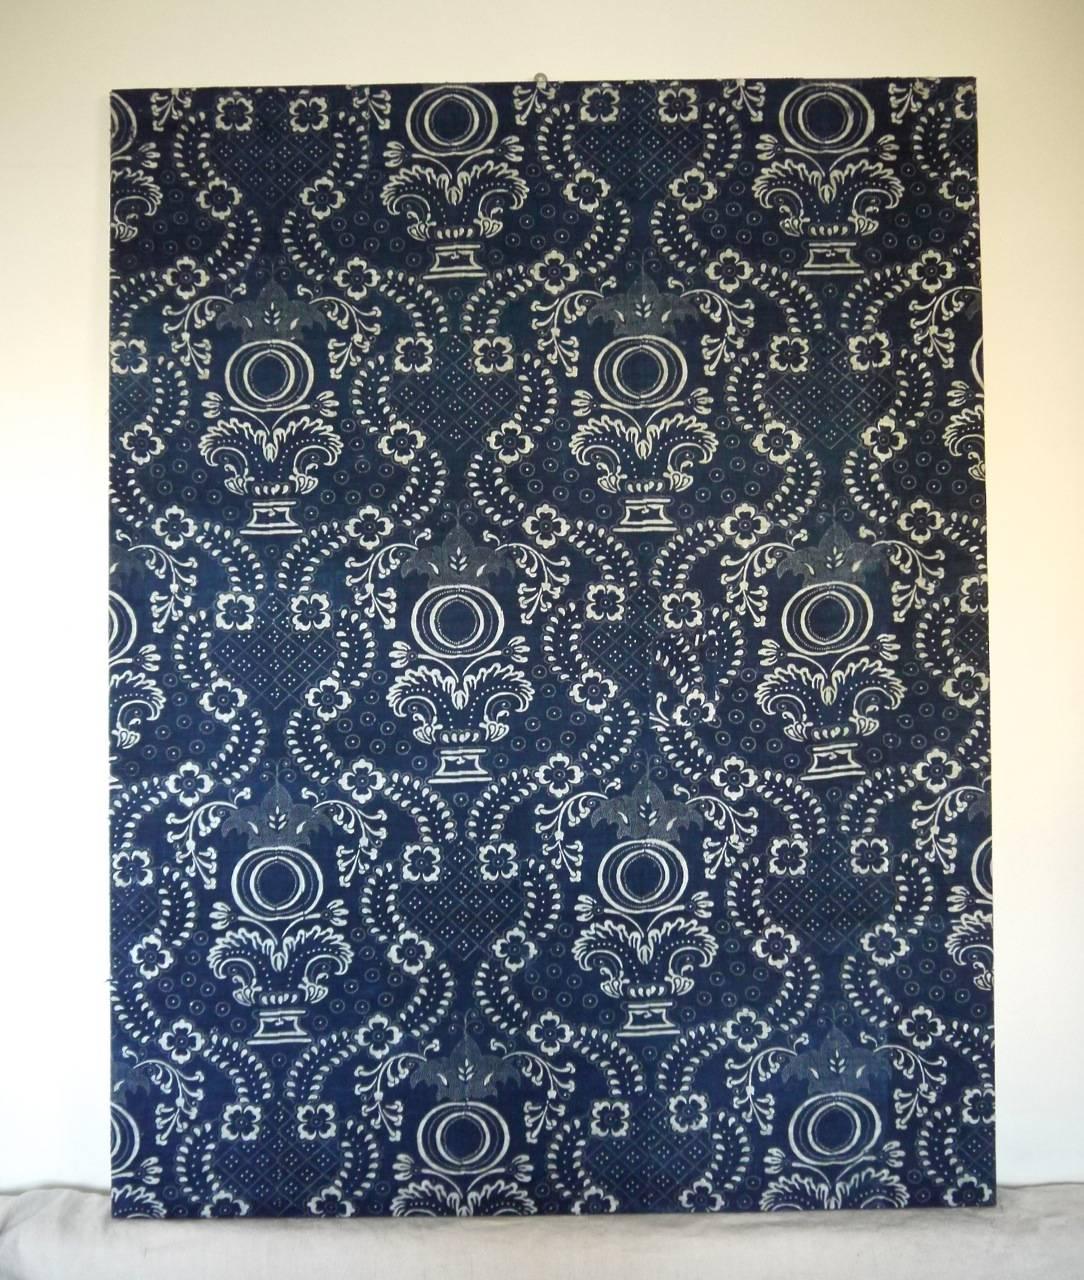 A French indigo resist block printed on cotton, circa 1800. Now mounted on a pine stretcher. To make a great wall decoration. Striking design of pomegranate motifs.